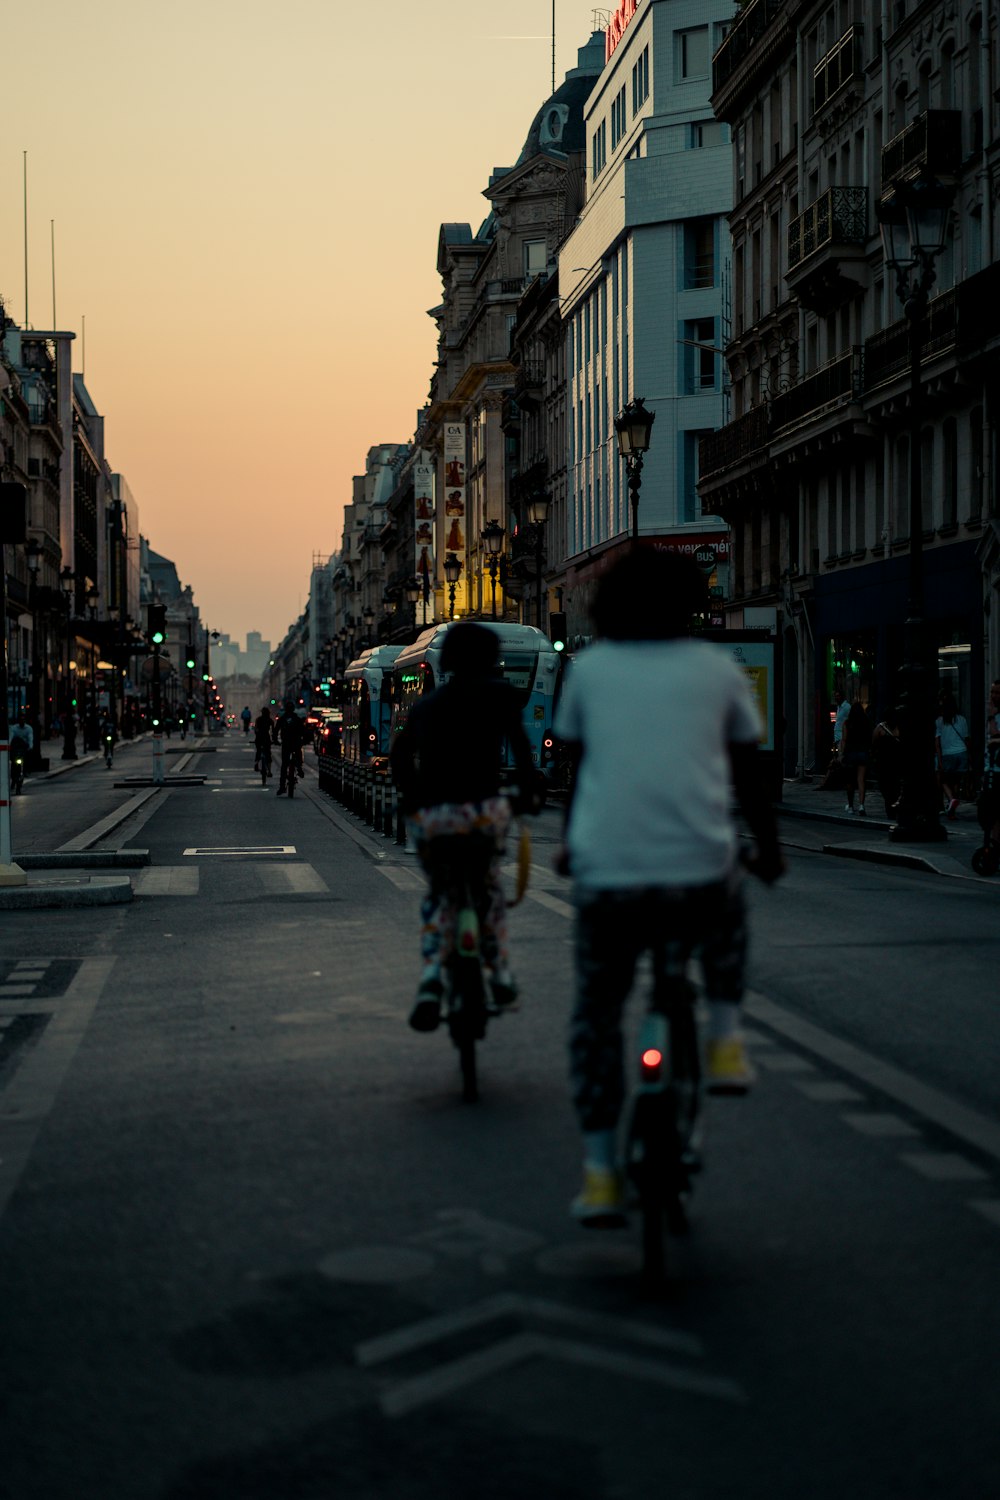 a group of people riding bicycles on a street